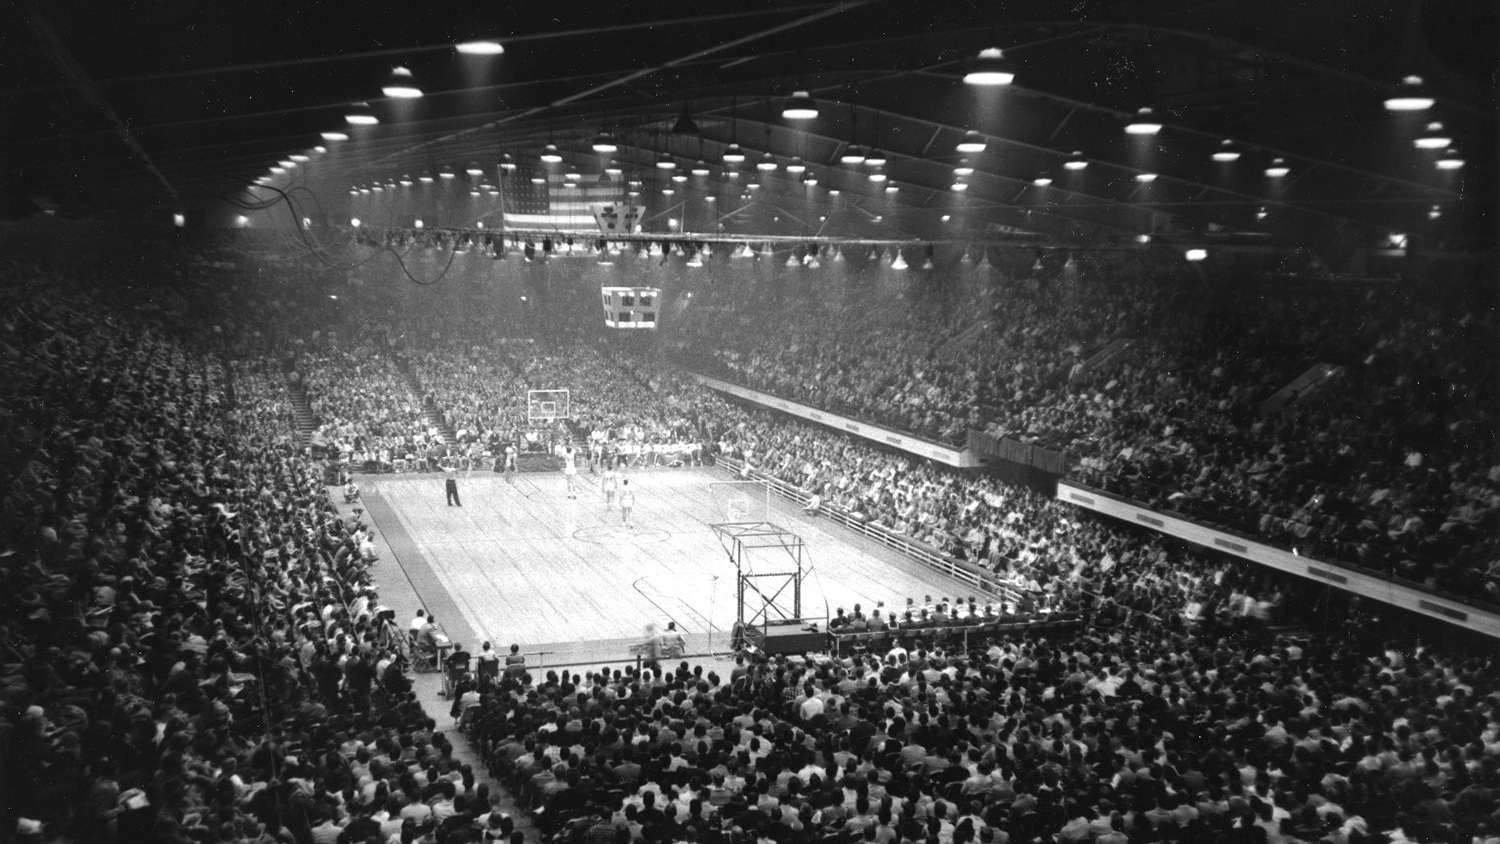 scene from a basketball game at Reynolds Coliseum in 1958